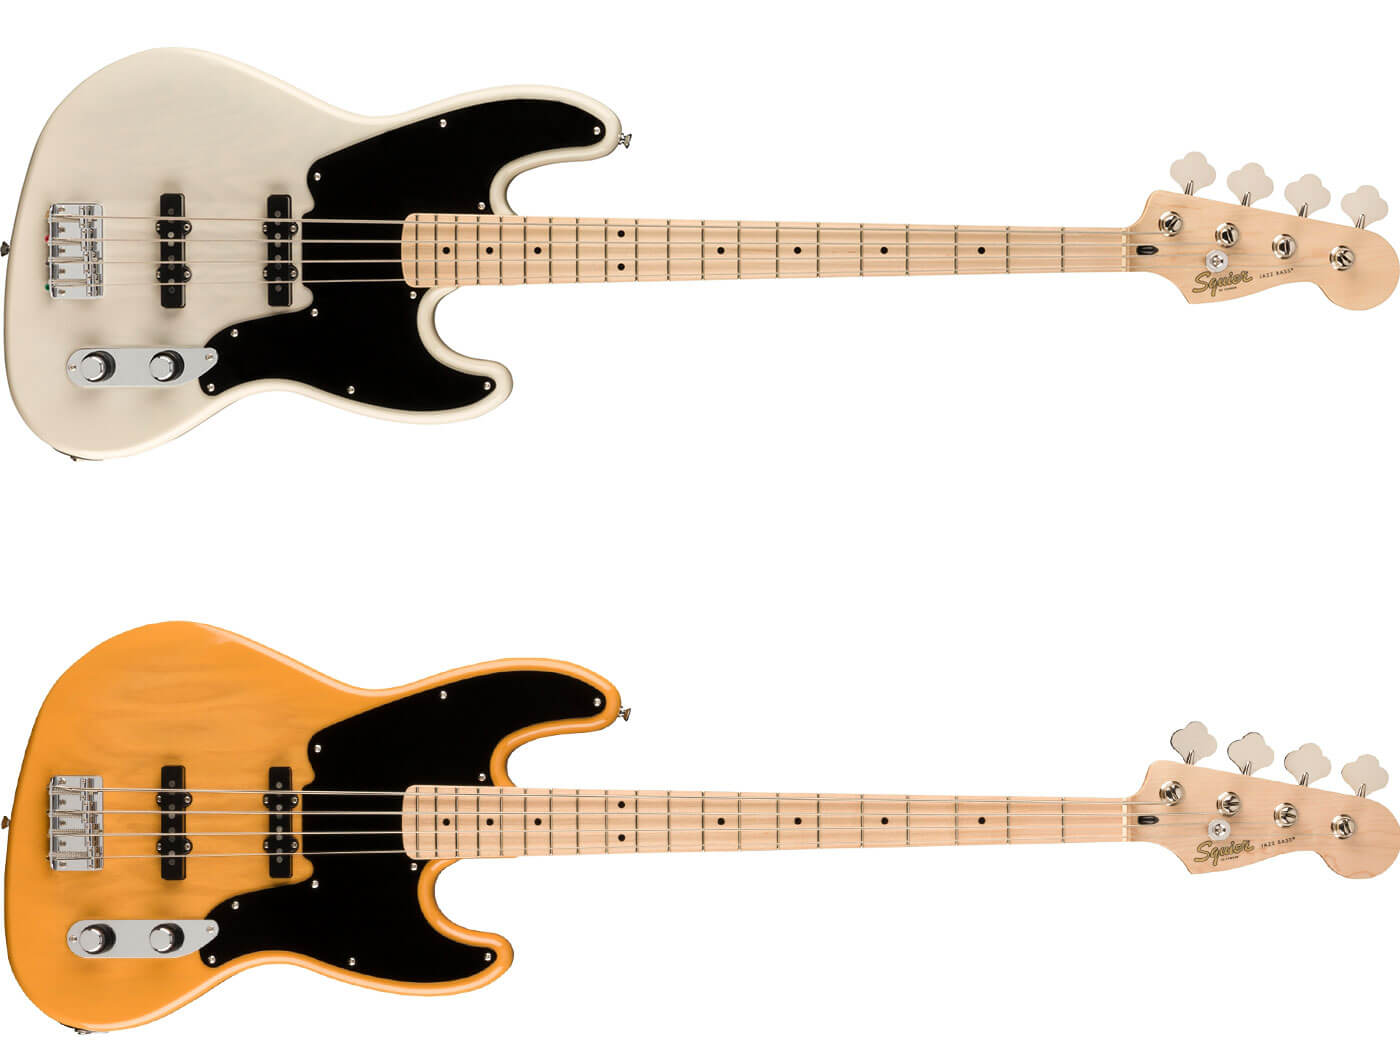 The Squier Paranormal Jazz Bass